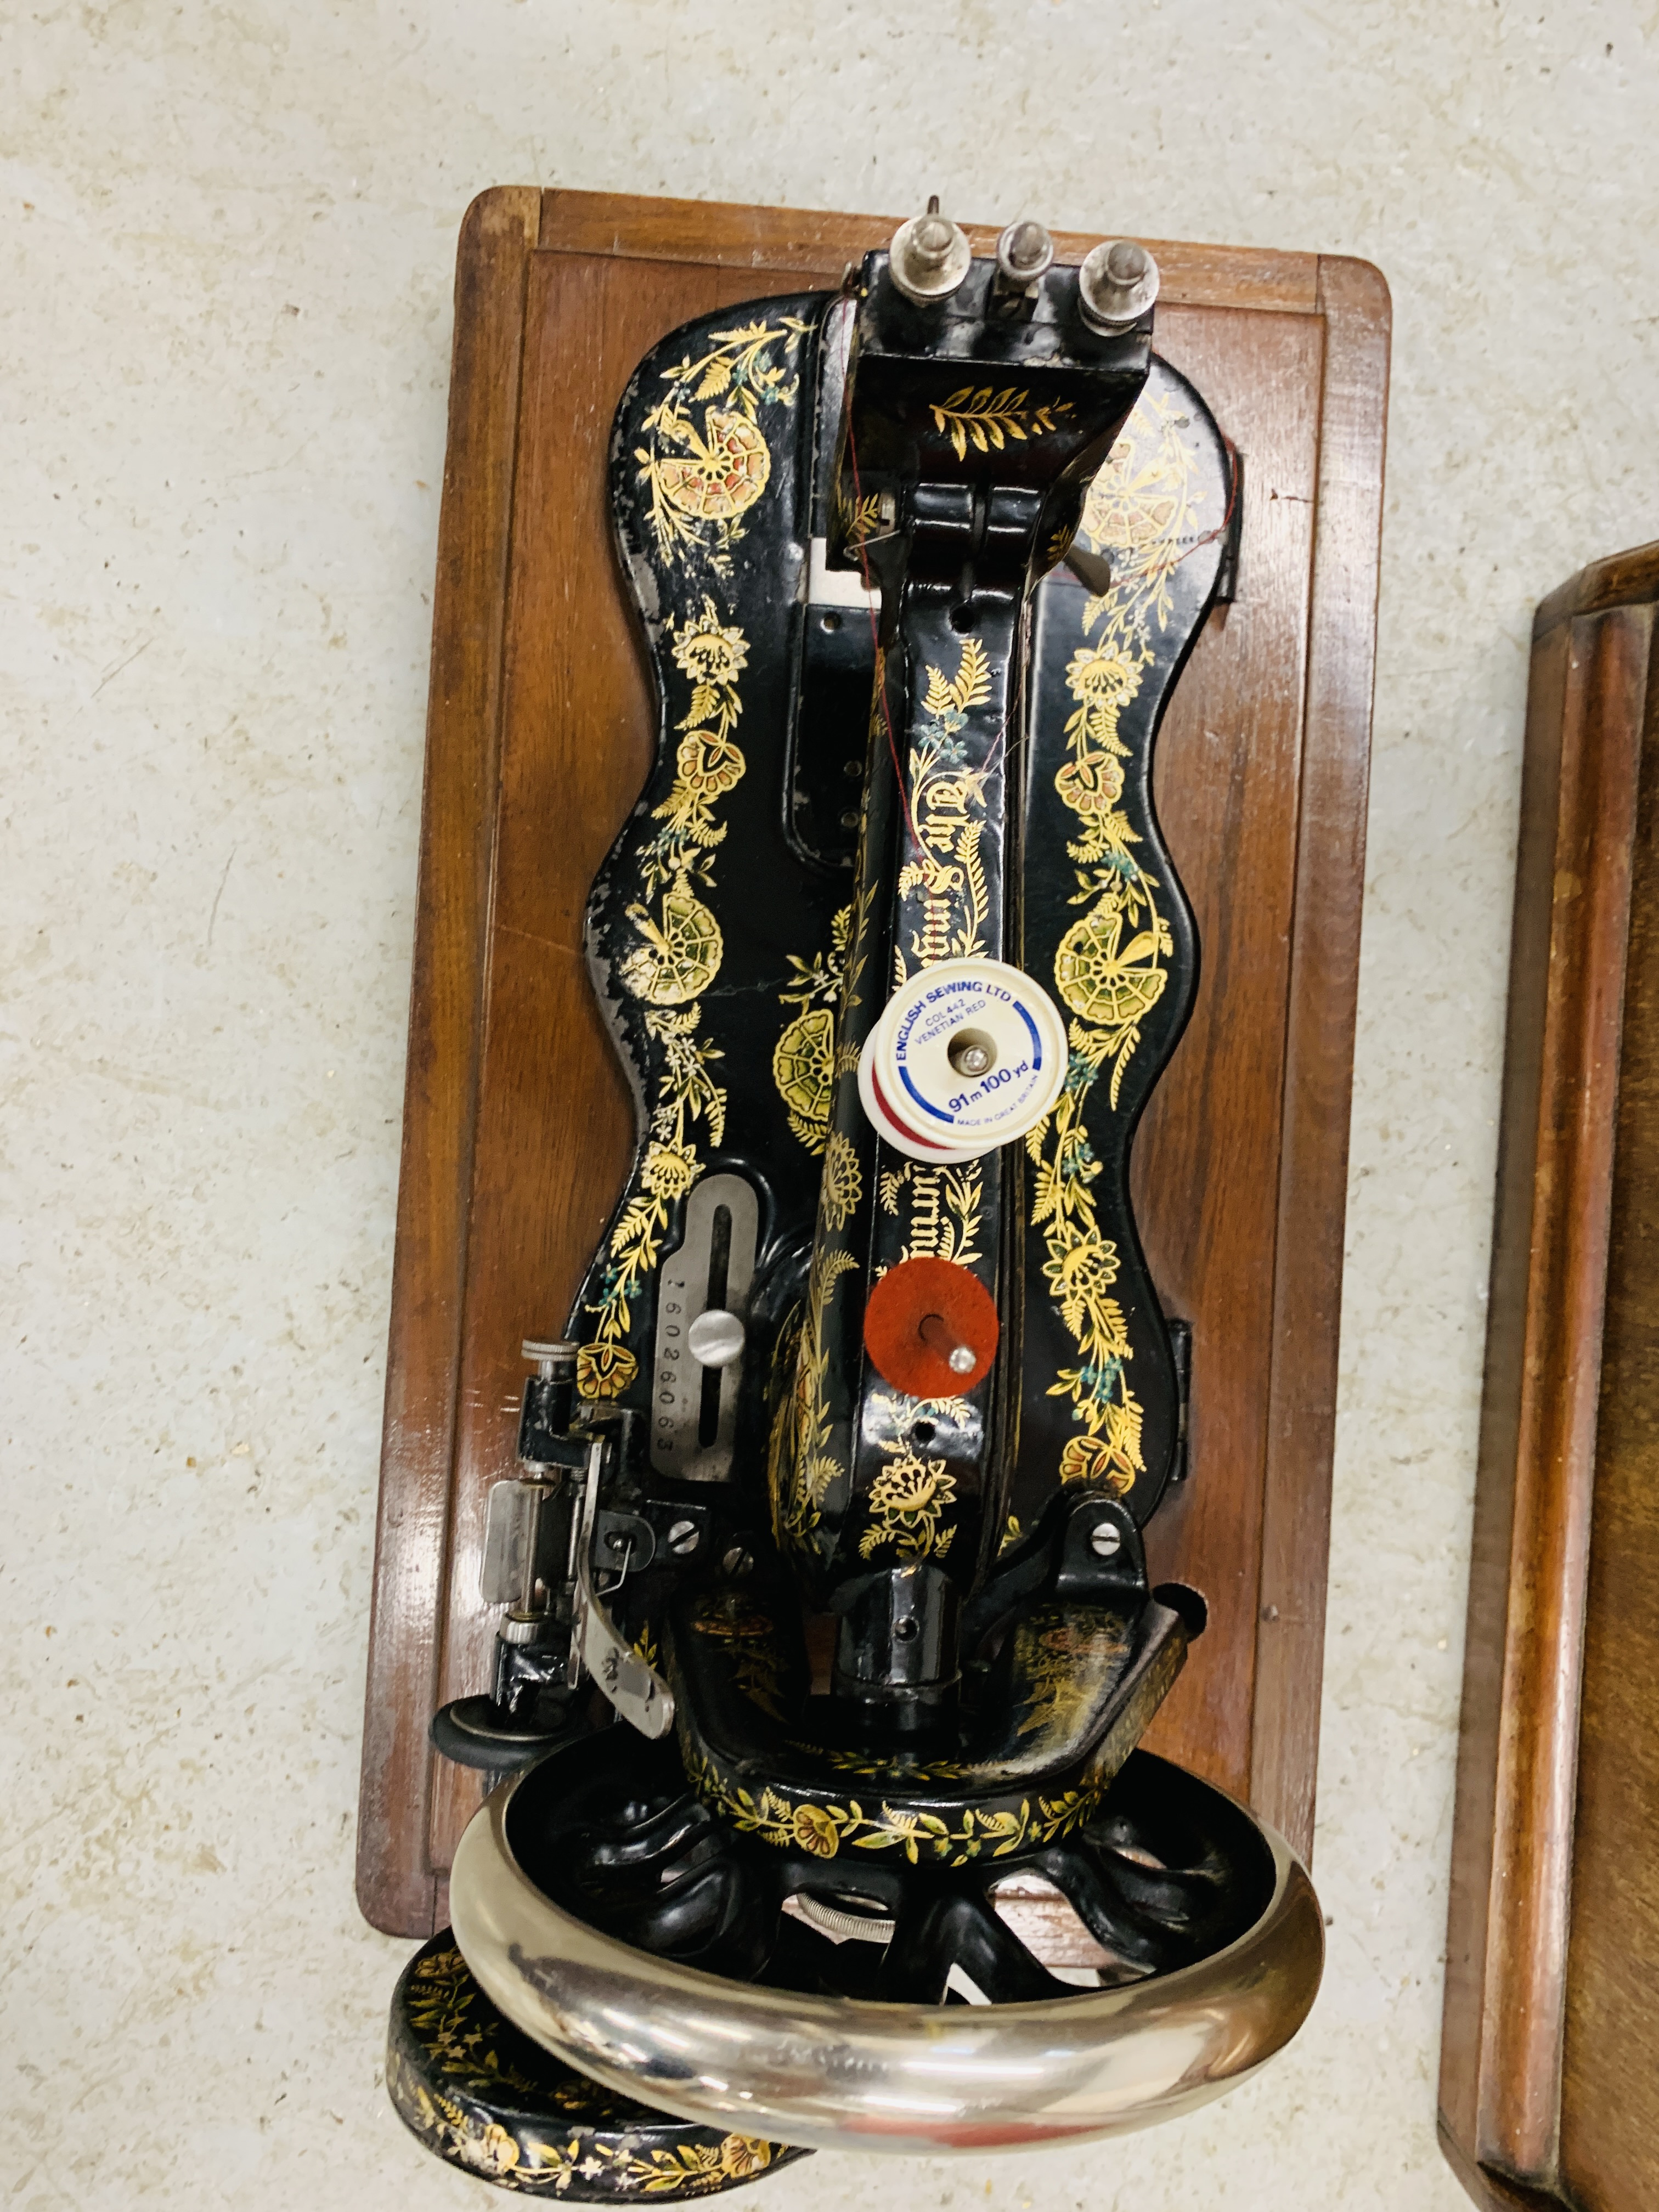 A VINTAGE SINGER GILT DECORATED MANUAL SEWING MACHINE UNDER ORIGINAL DOMED COVER - Image 4 of 6